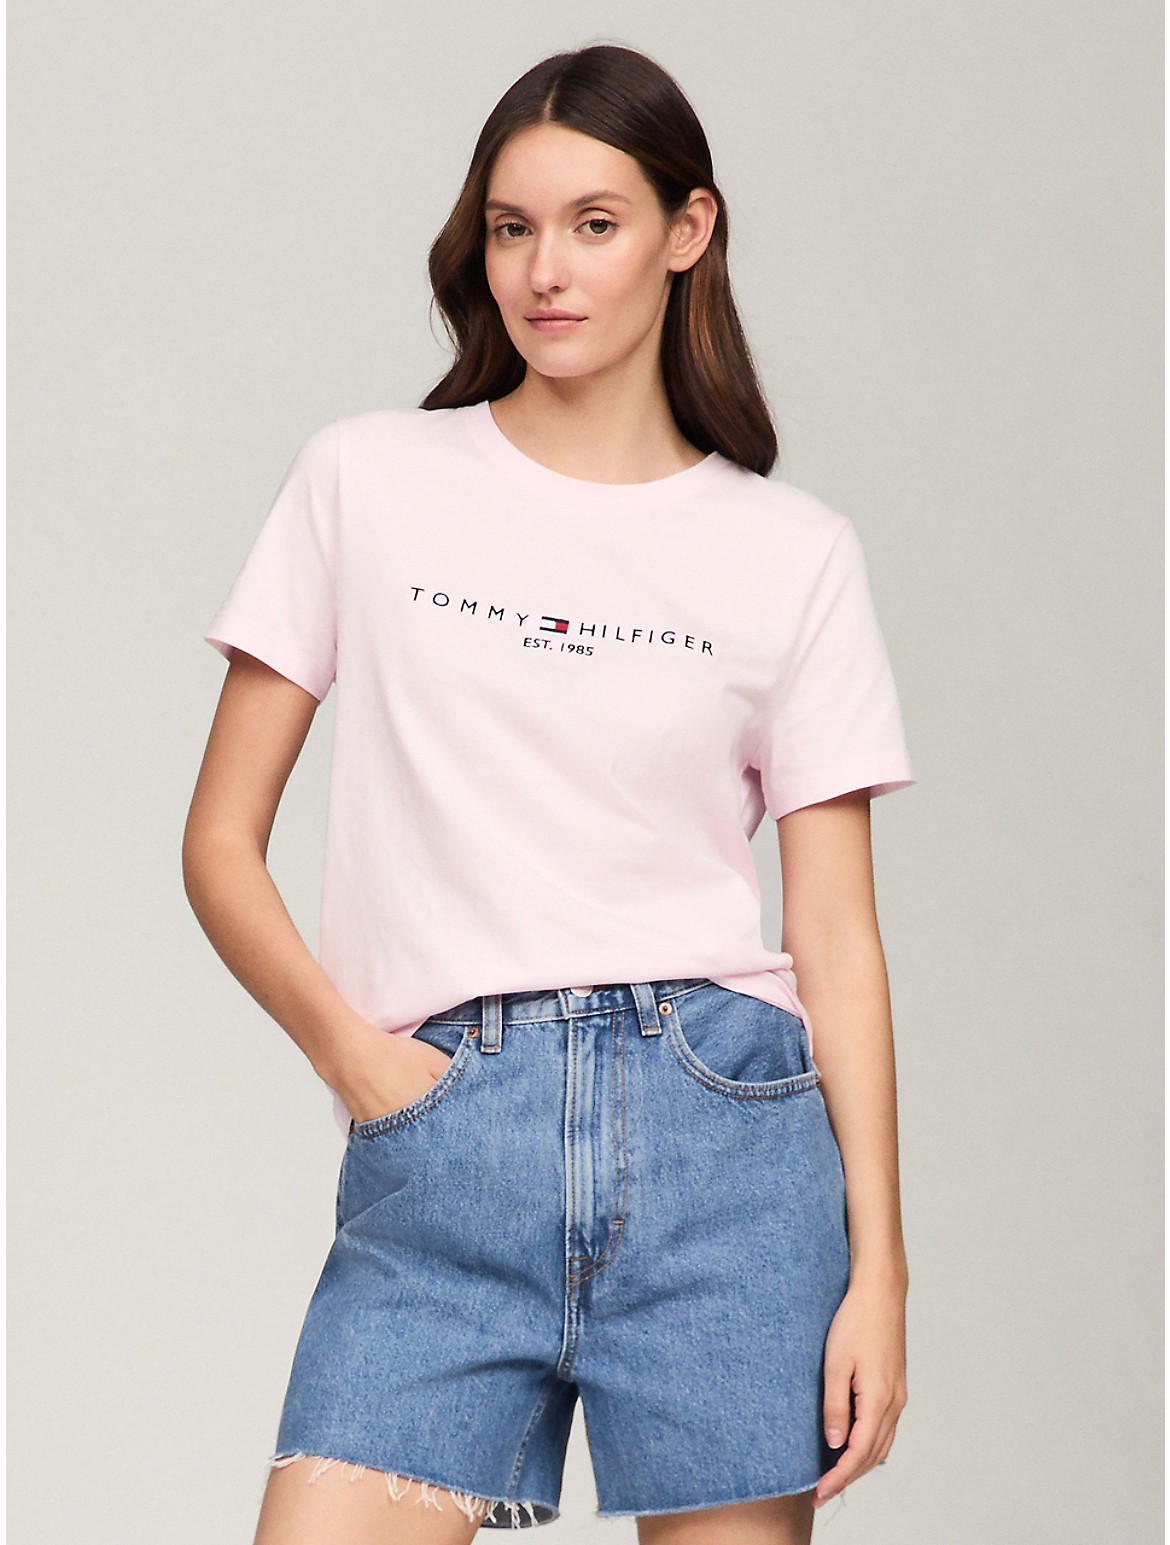 Tommy Hilfiger Women's Embroidered Tommy Logo T-Shirt